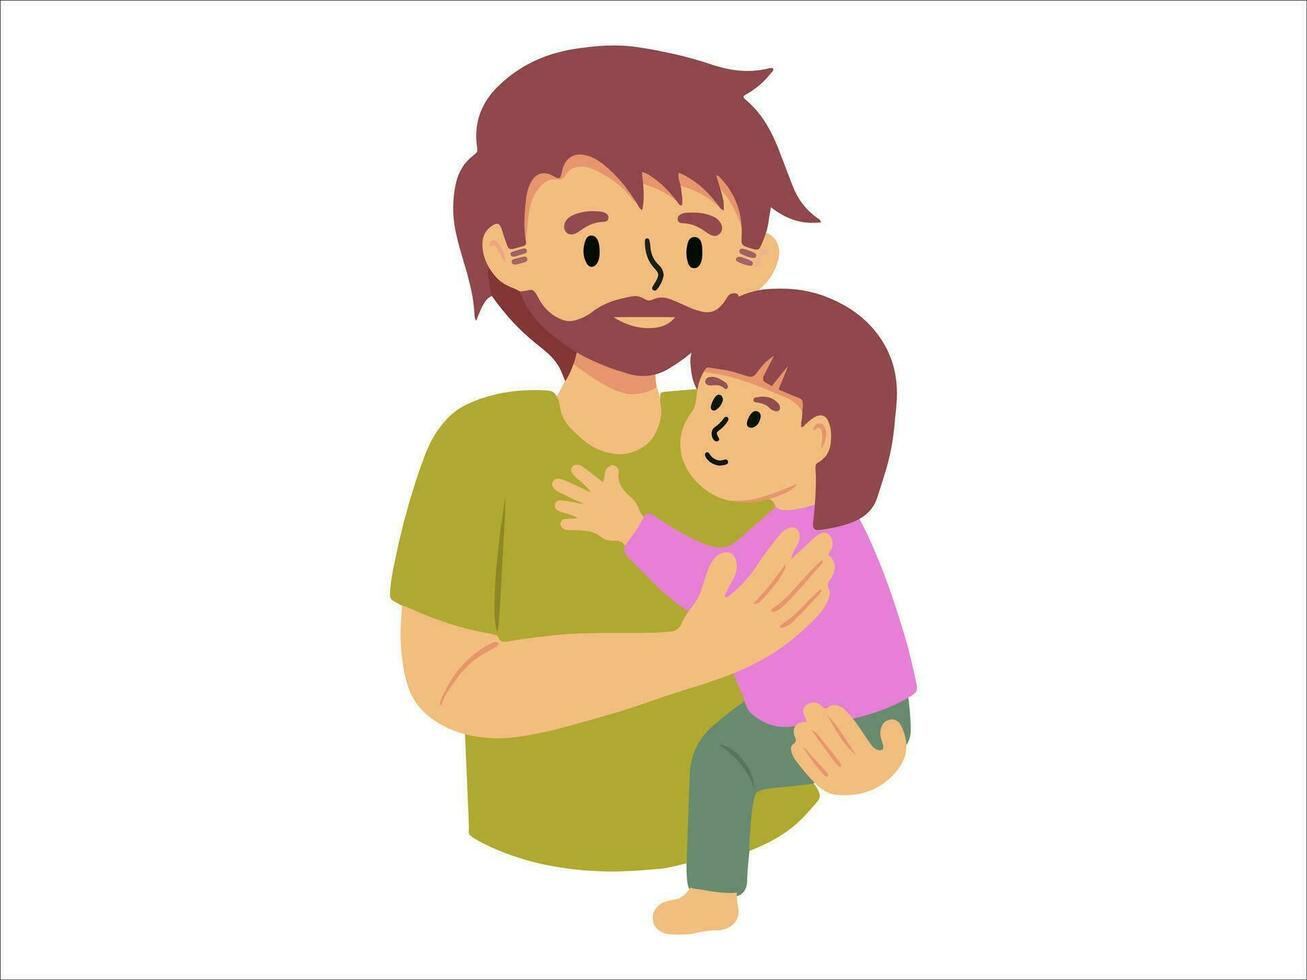 Father holding baby or avatar icon illustration vector